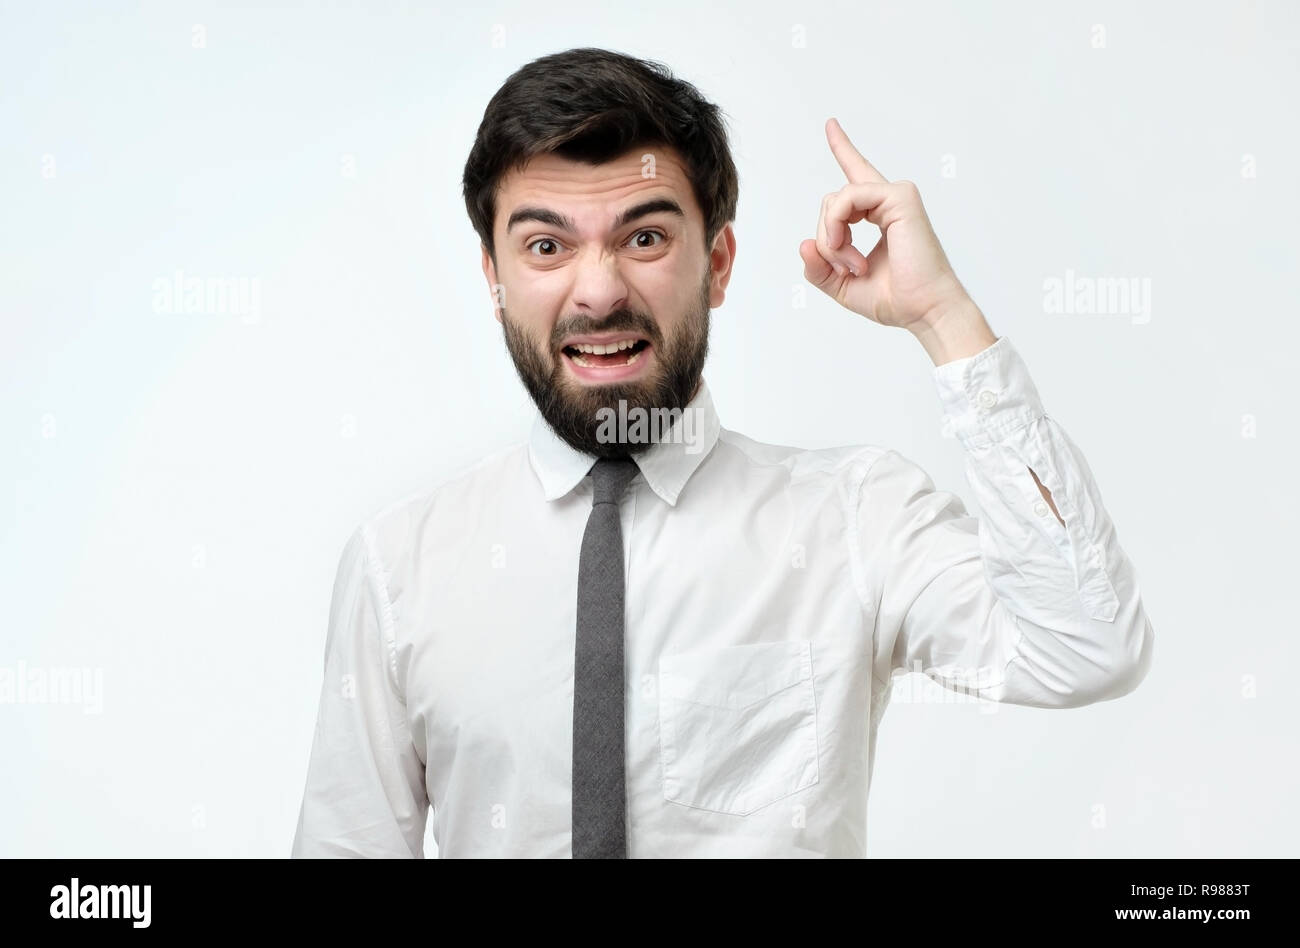 Angry man in ite and white shirt screaming Stock Photo